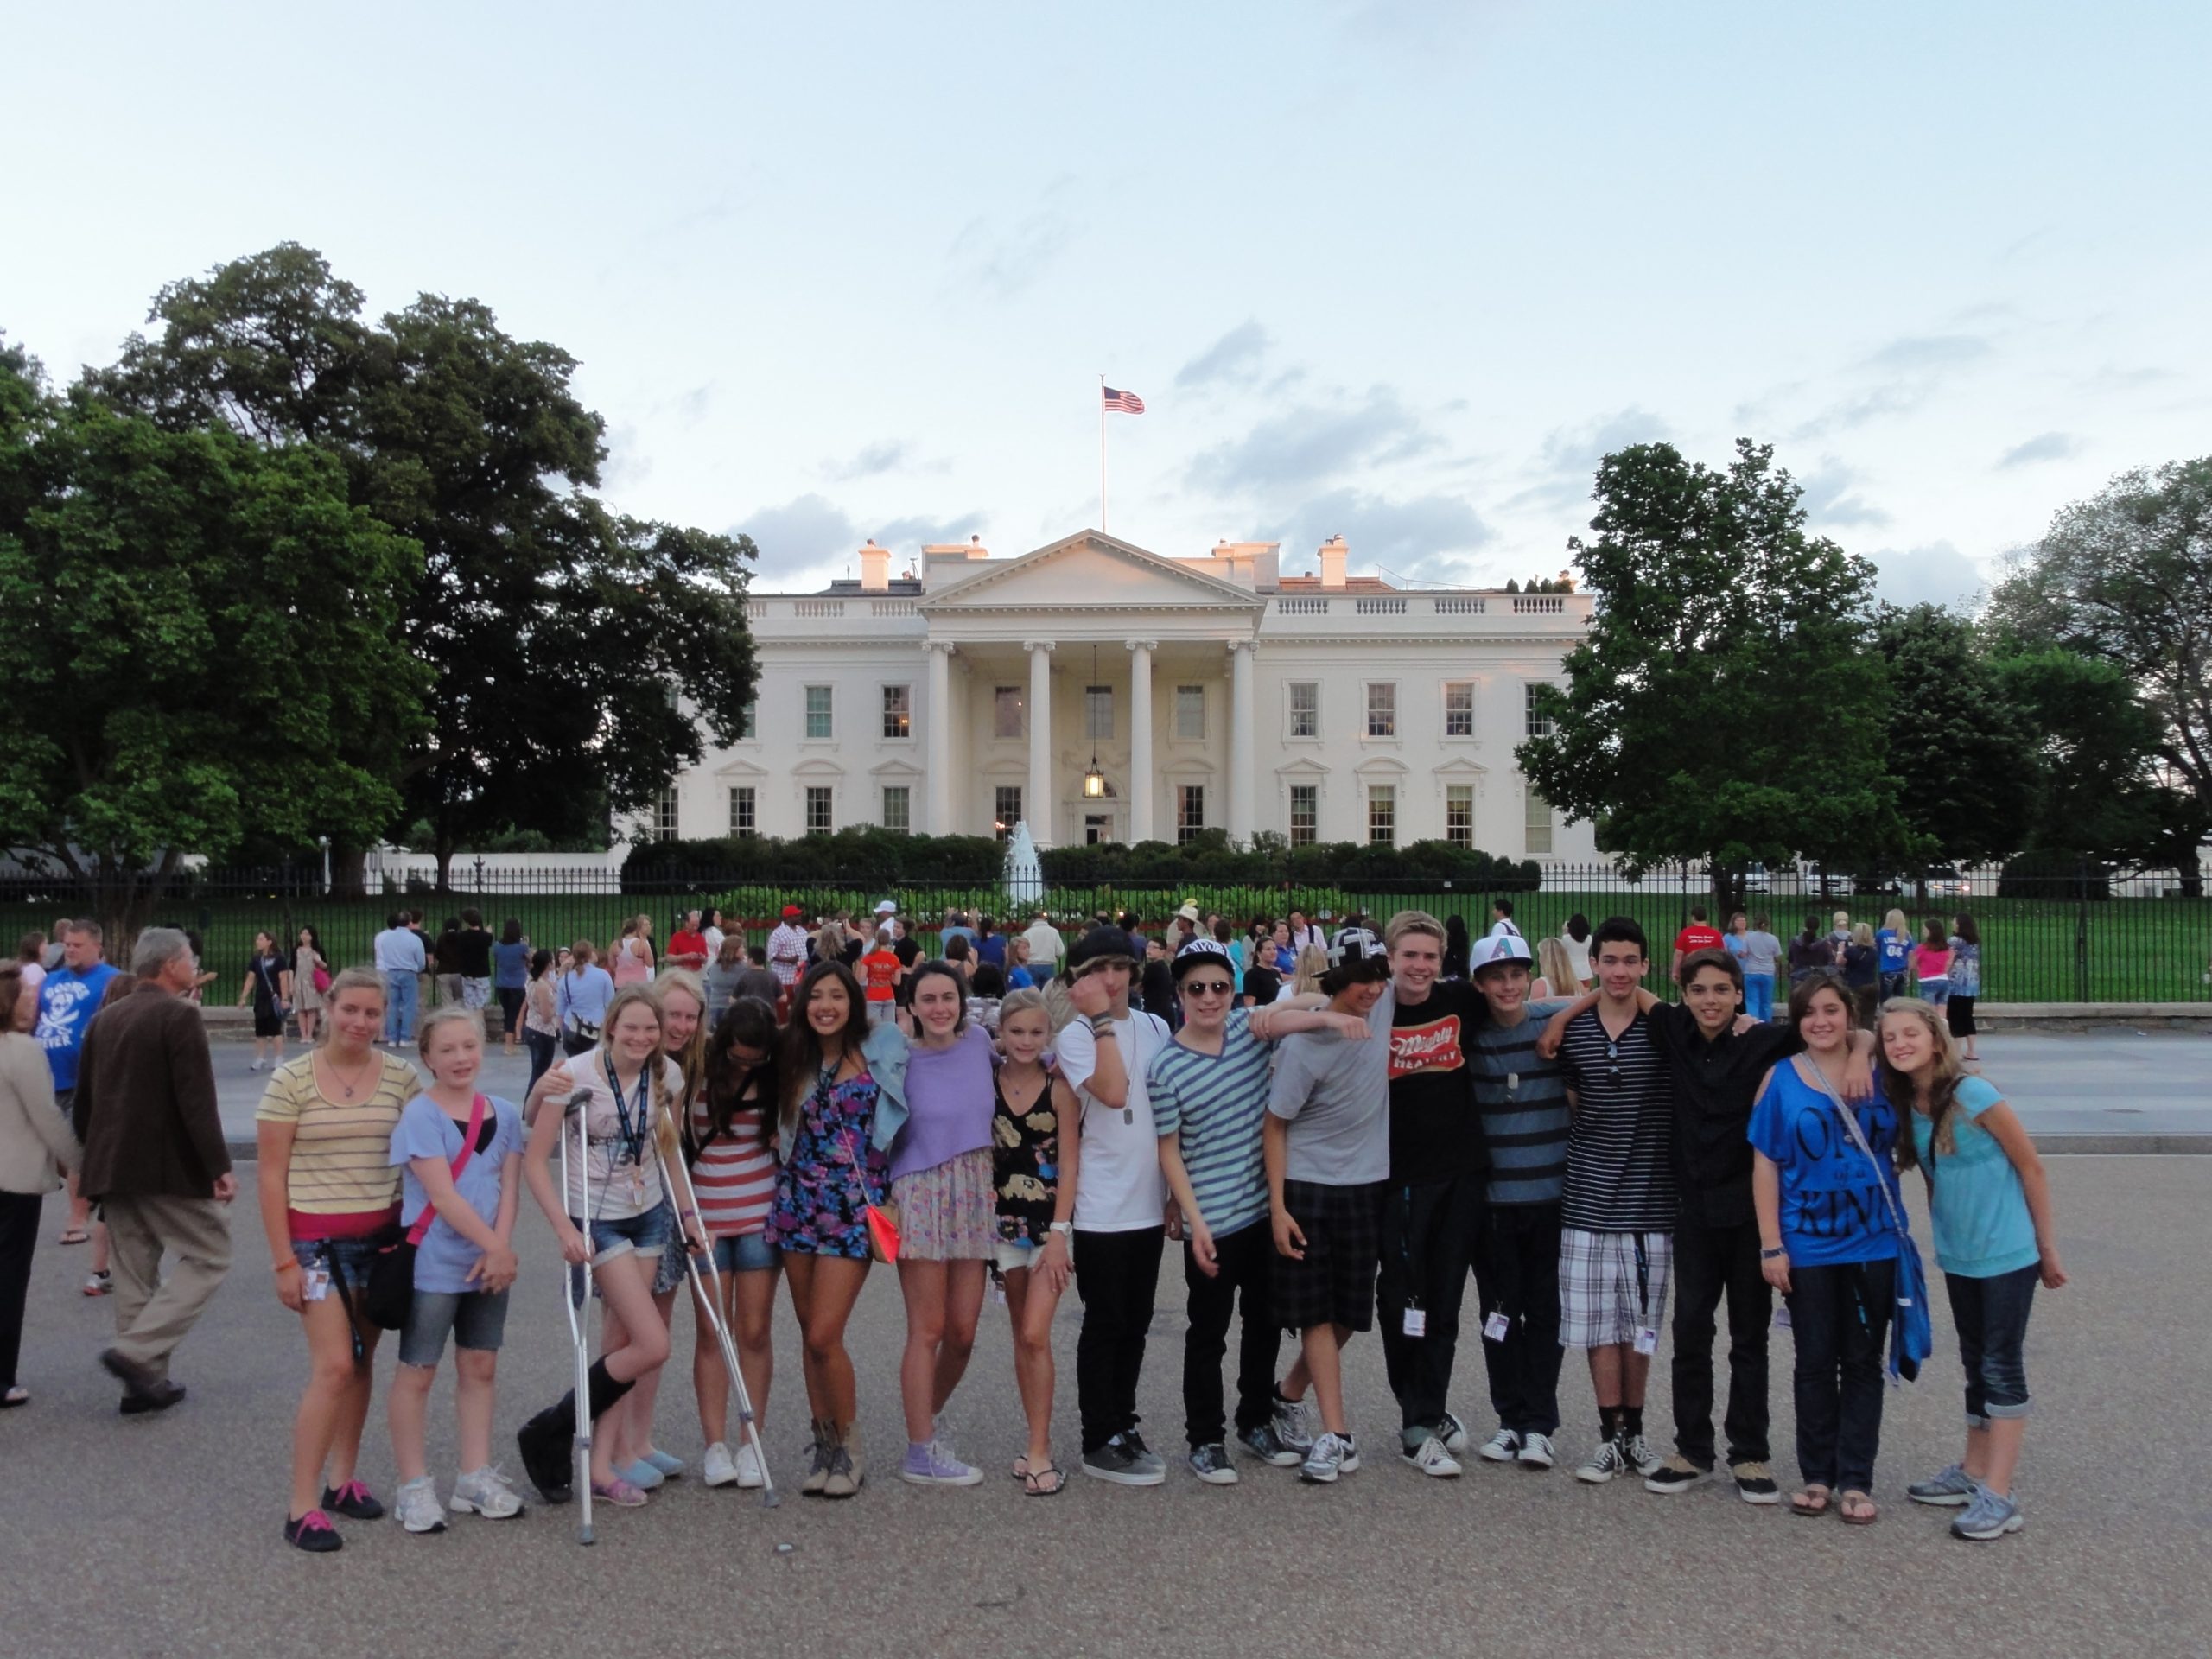 group of students posing in front of the White House in Washington DC